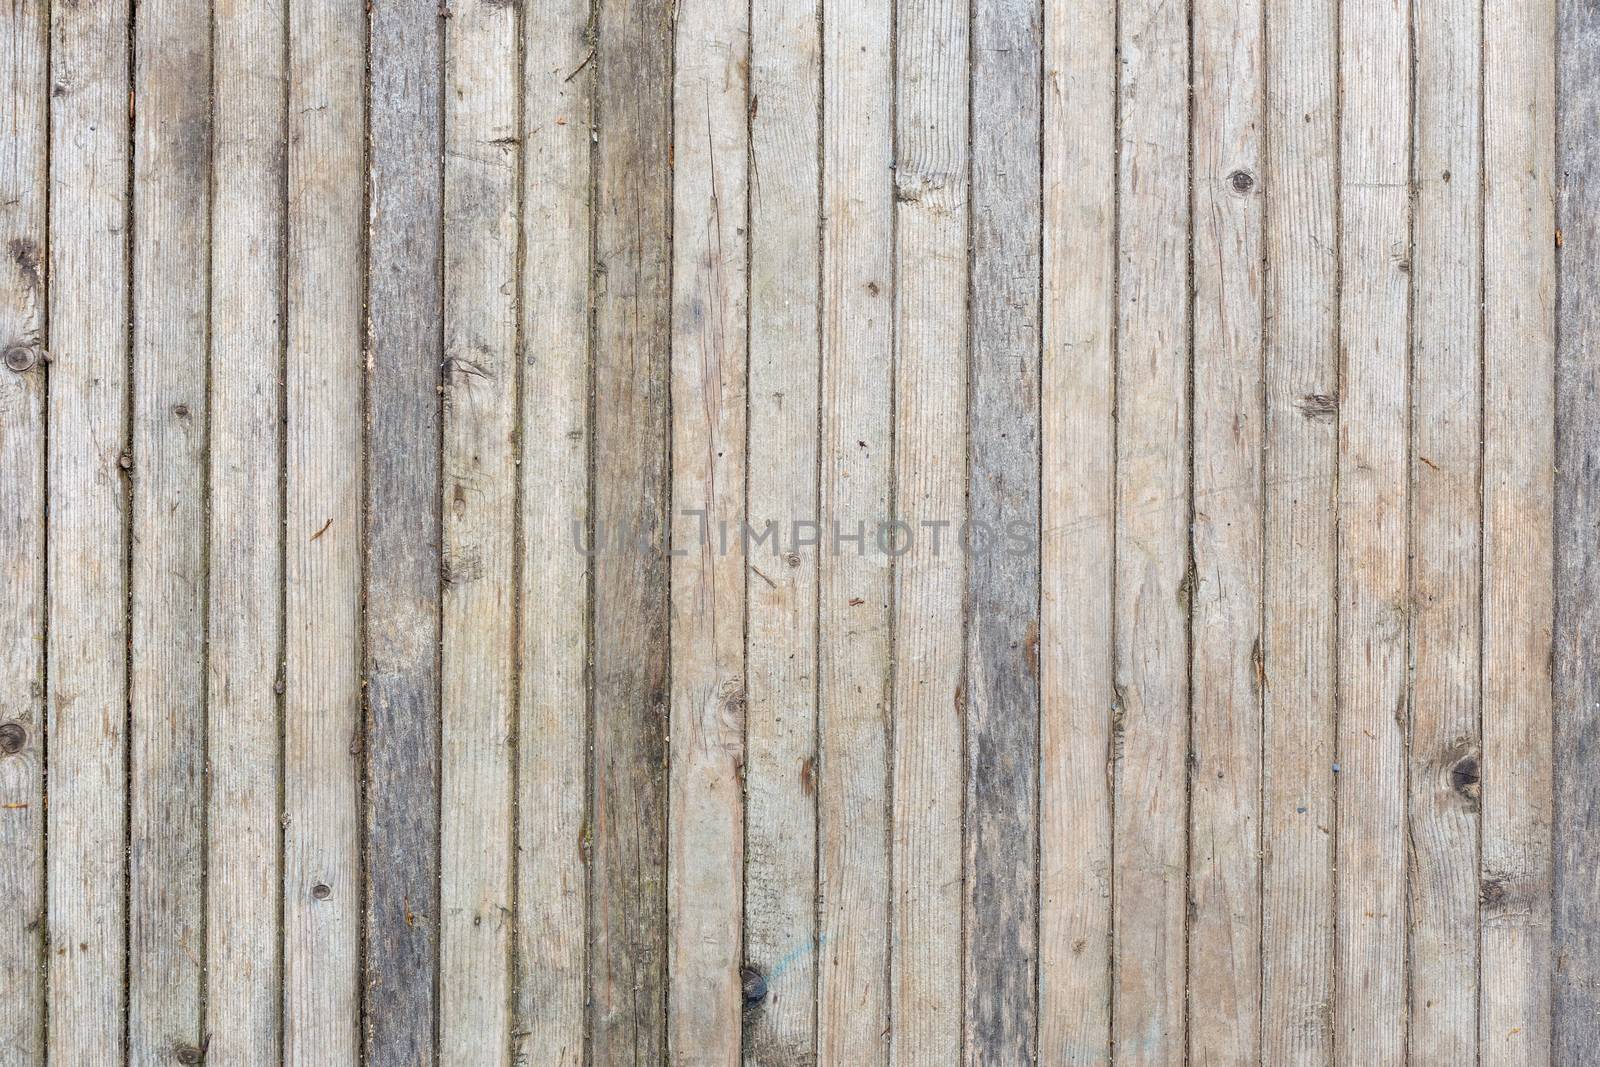 flat texture and background of vertical gray thin solid wooden planks - old, and worn out